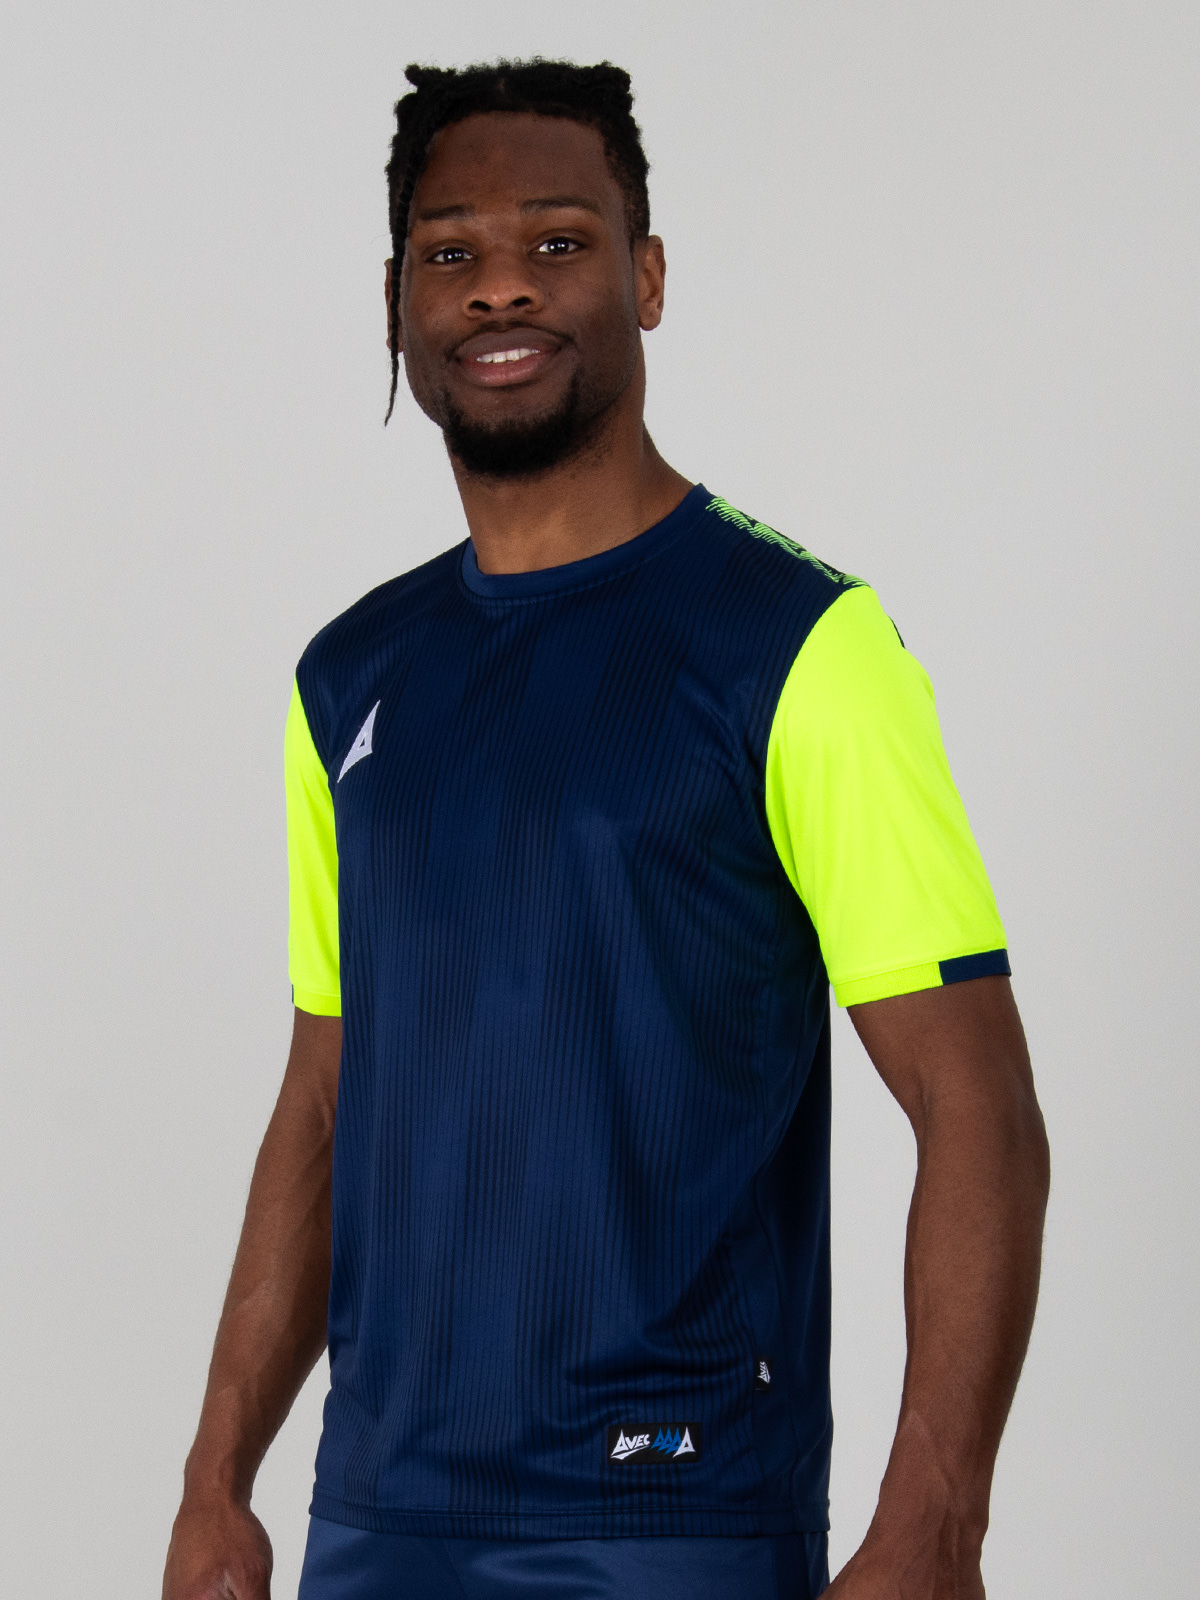 model wearing a navy blue and yellow / volt sports football training t-shirt.